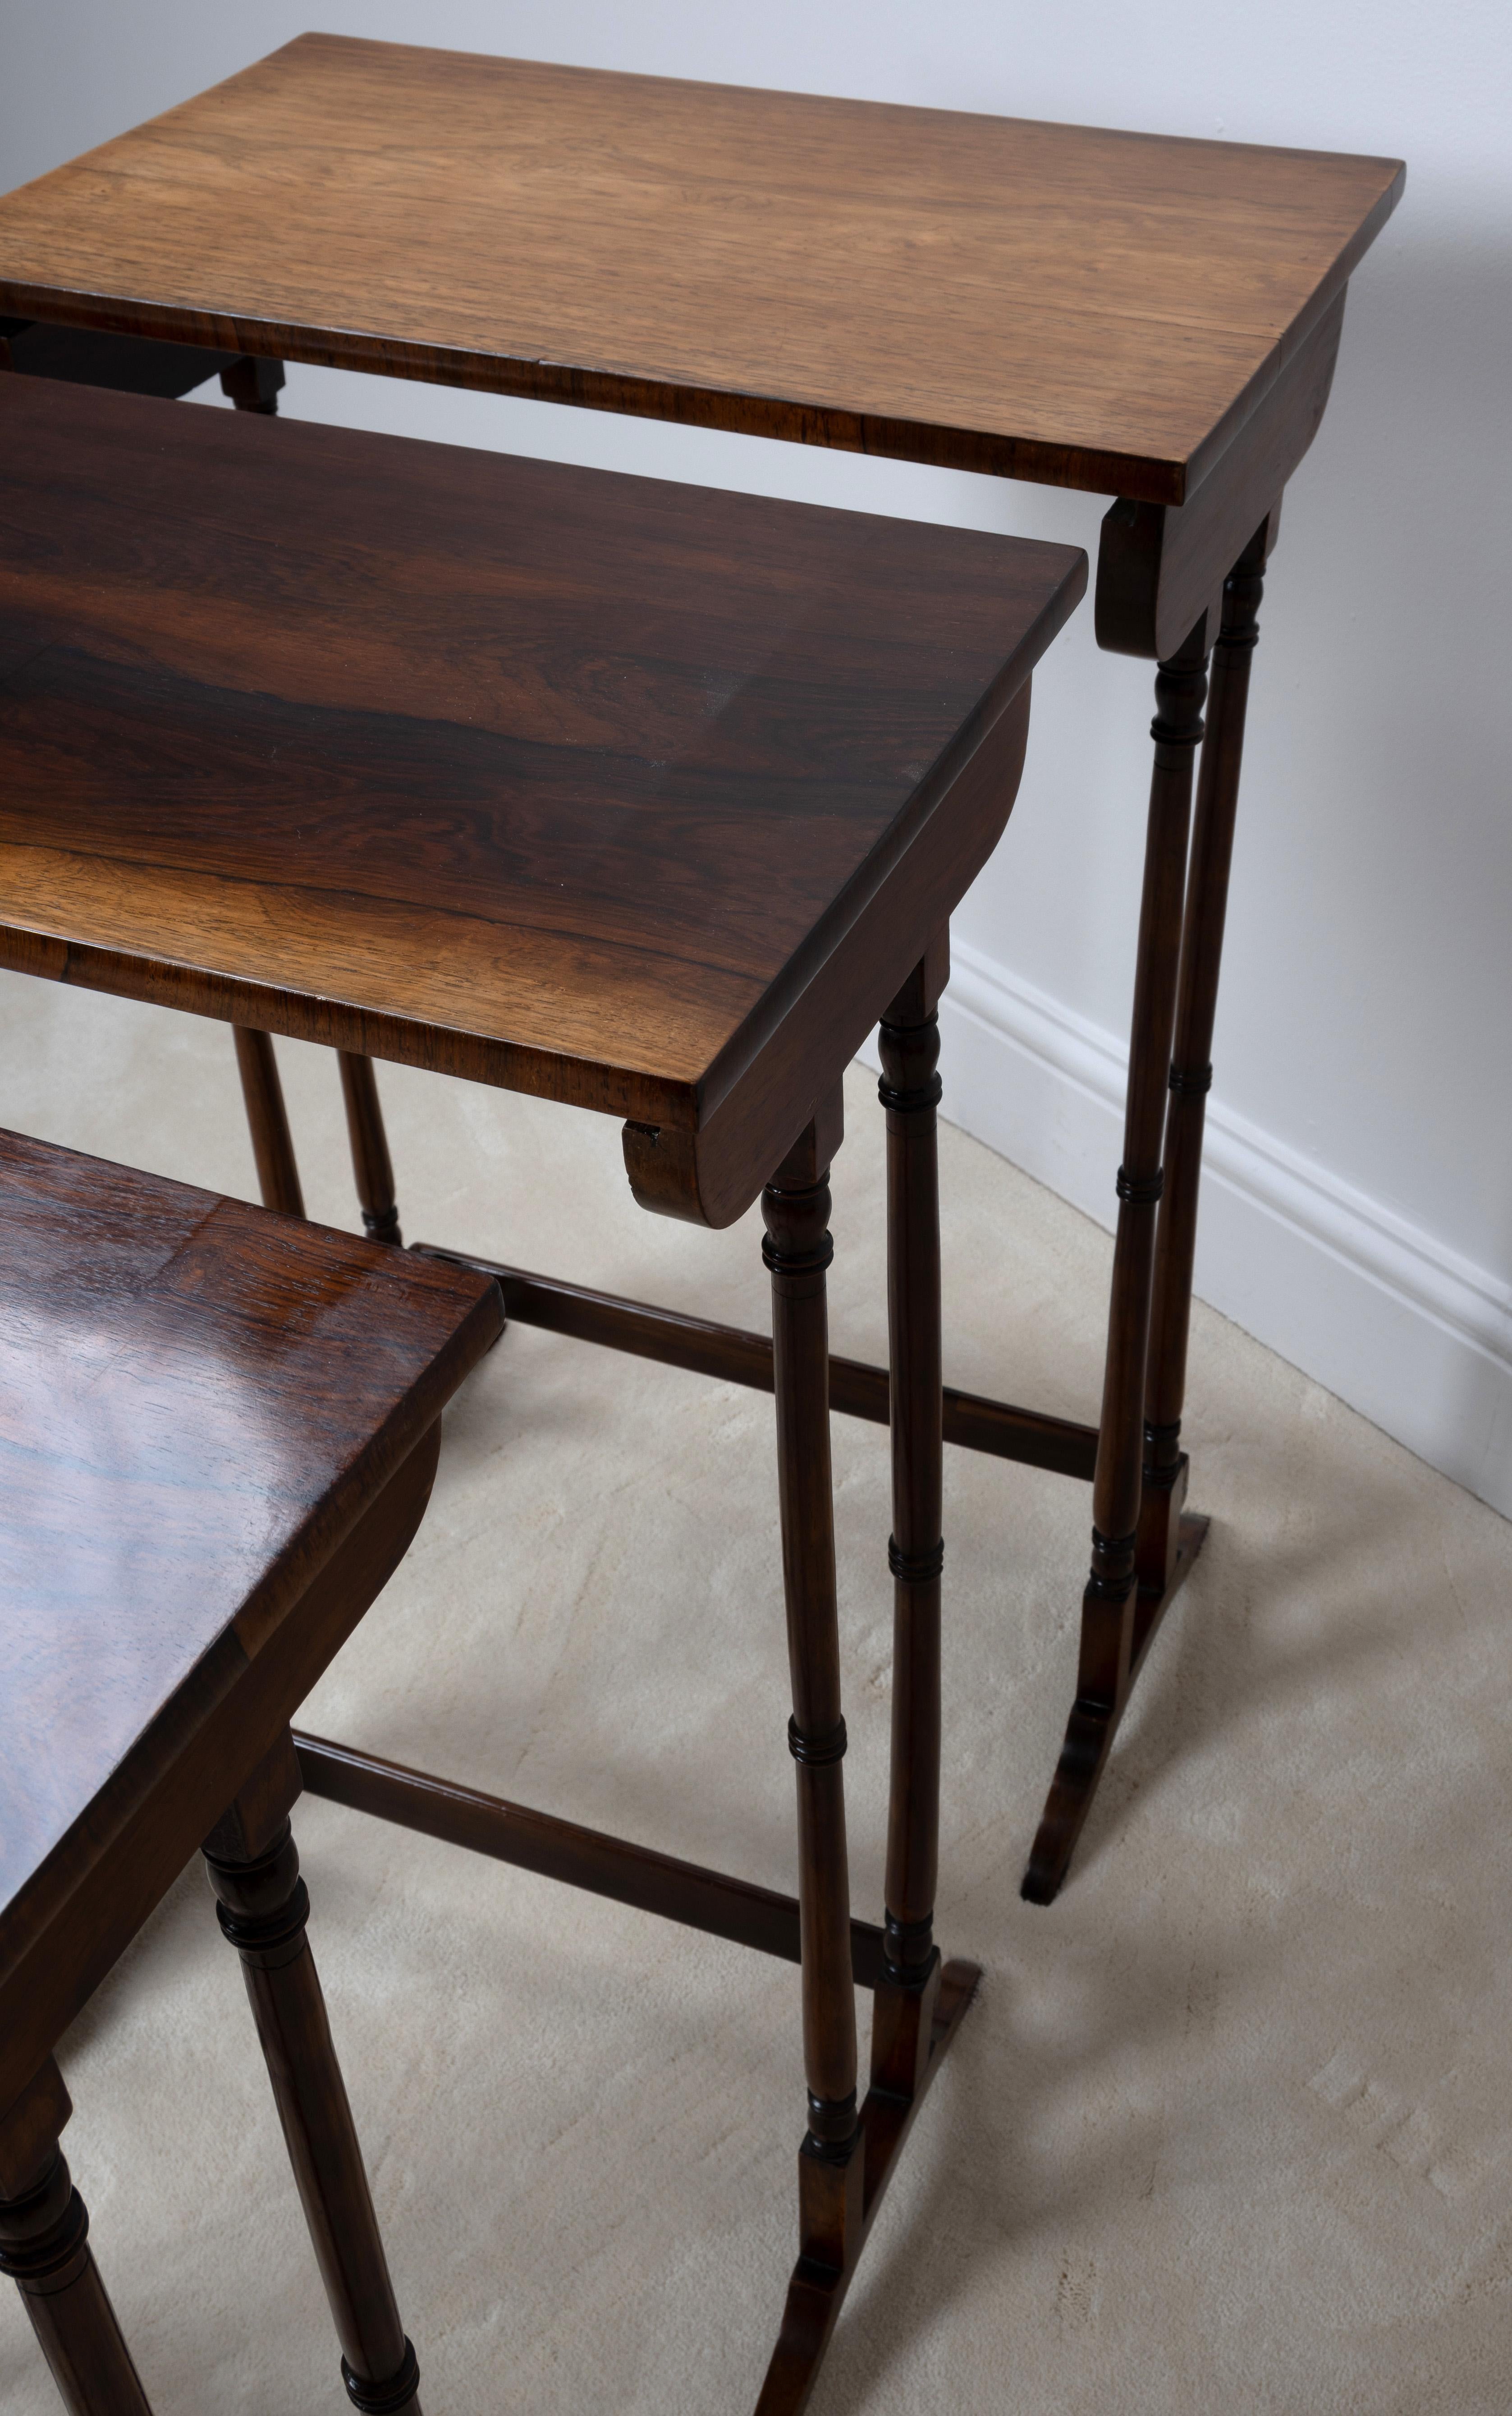 Antique English Regency Revival Rosewood Quartetto Of Nesting Table C.1820 For Sale 6